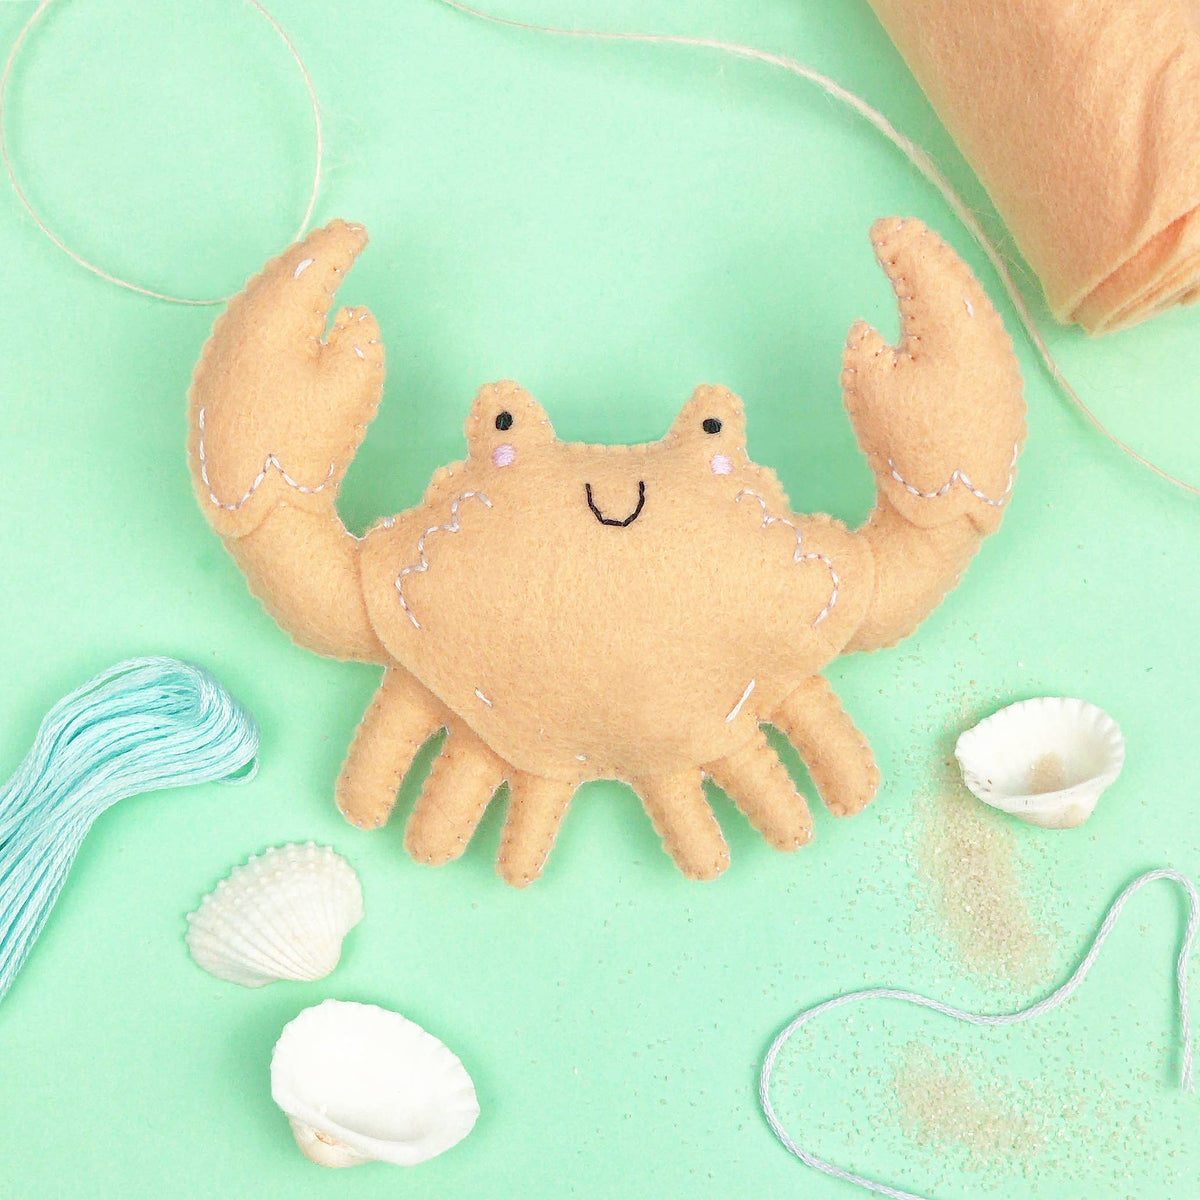 Connie the Crab Felt Sewing Kit